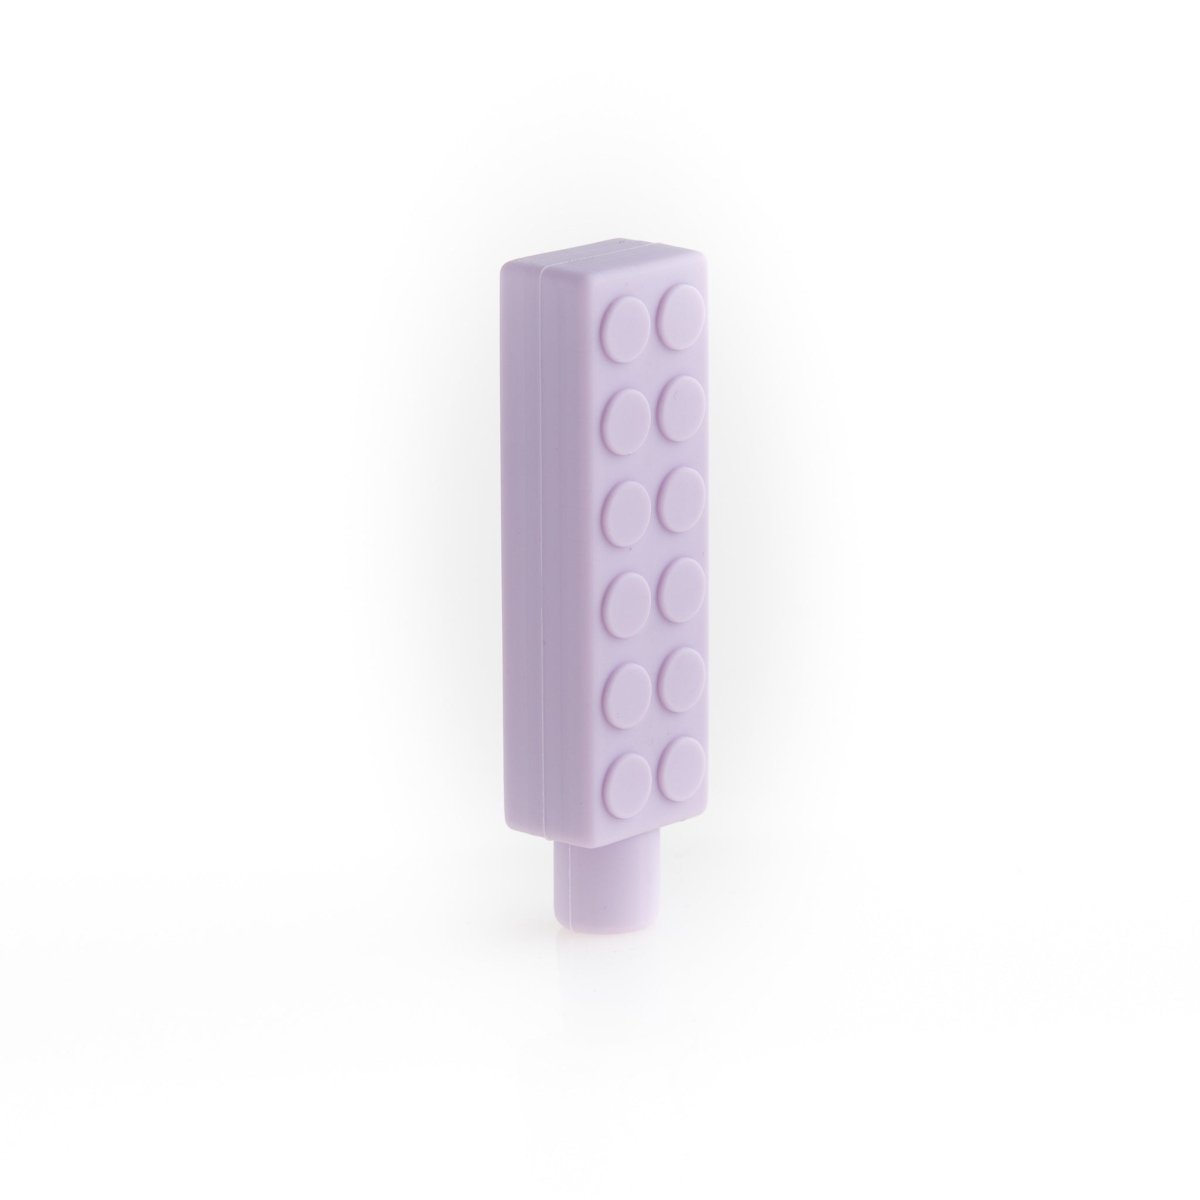 Silicone Teethers and Pendants Chewable Pencil Topper Lilac from Cara & Co Craft Supply